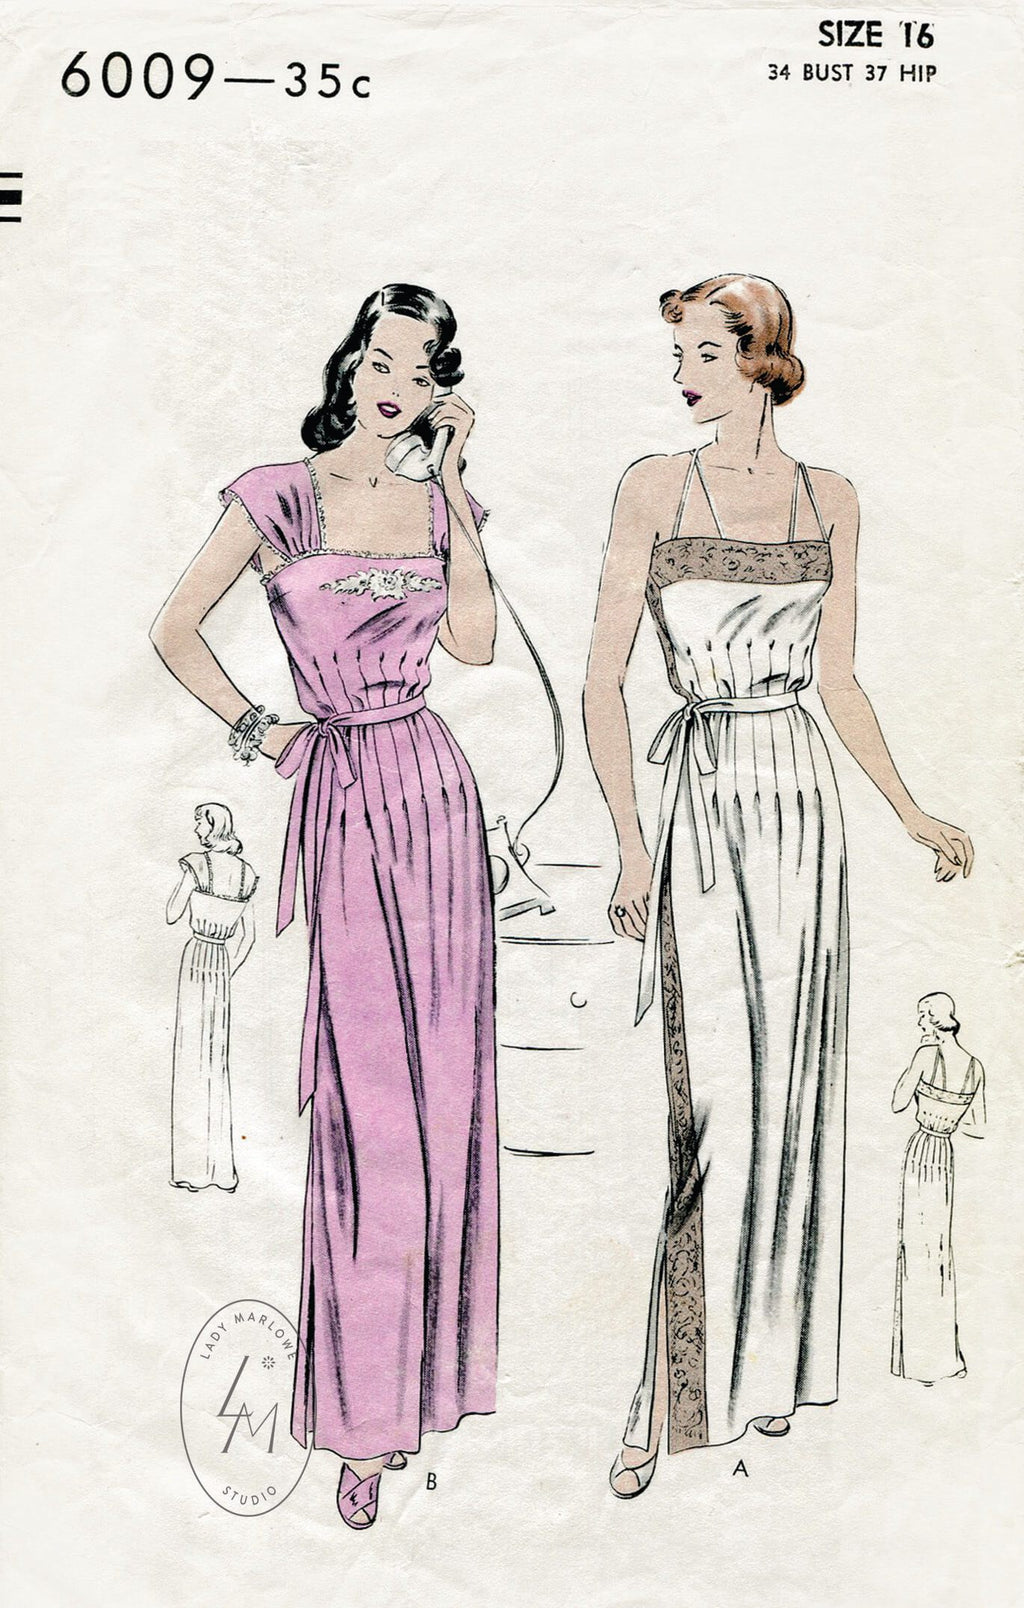 Vogue 6009 1940s vintage lingerie sewing pattern negligee dress